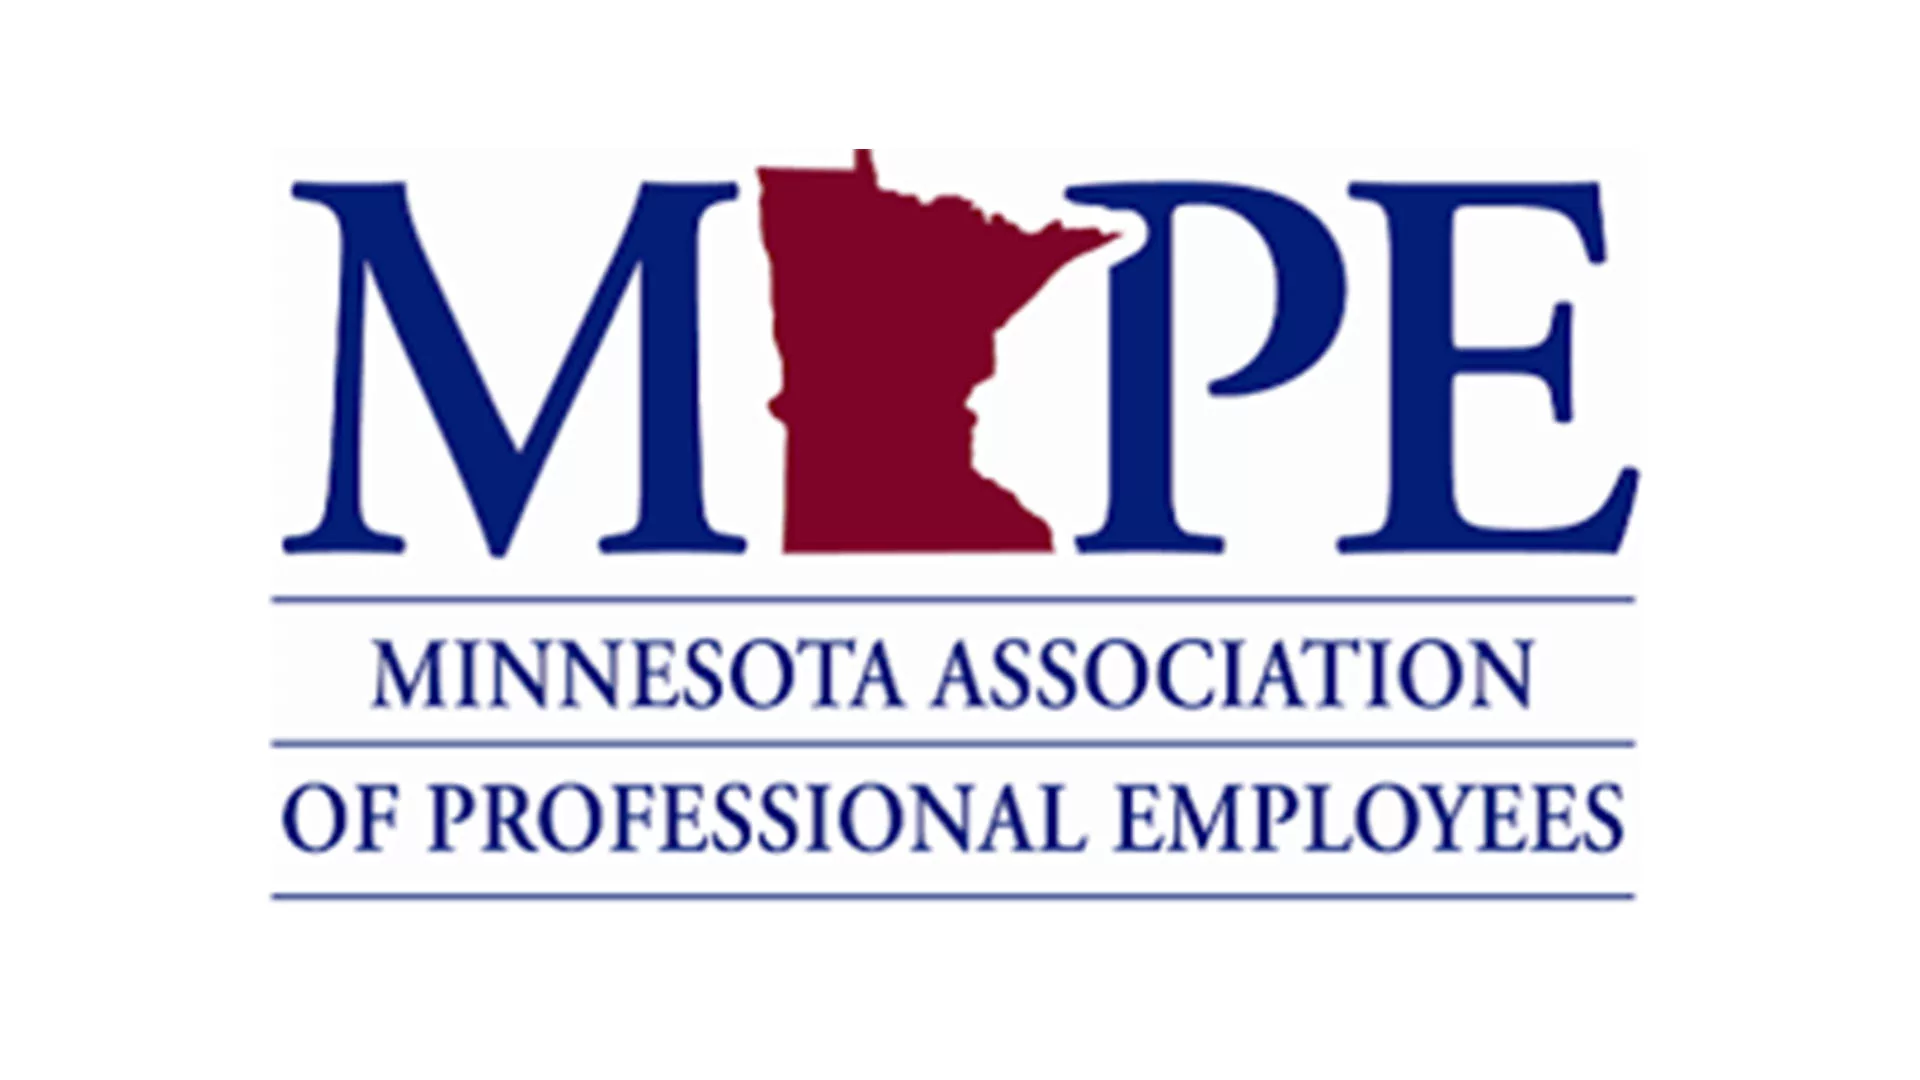 MN Association of Professional Employees